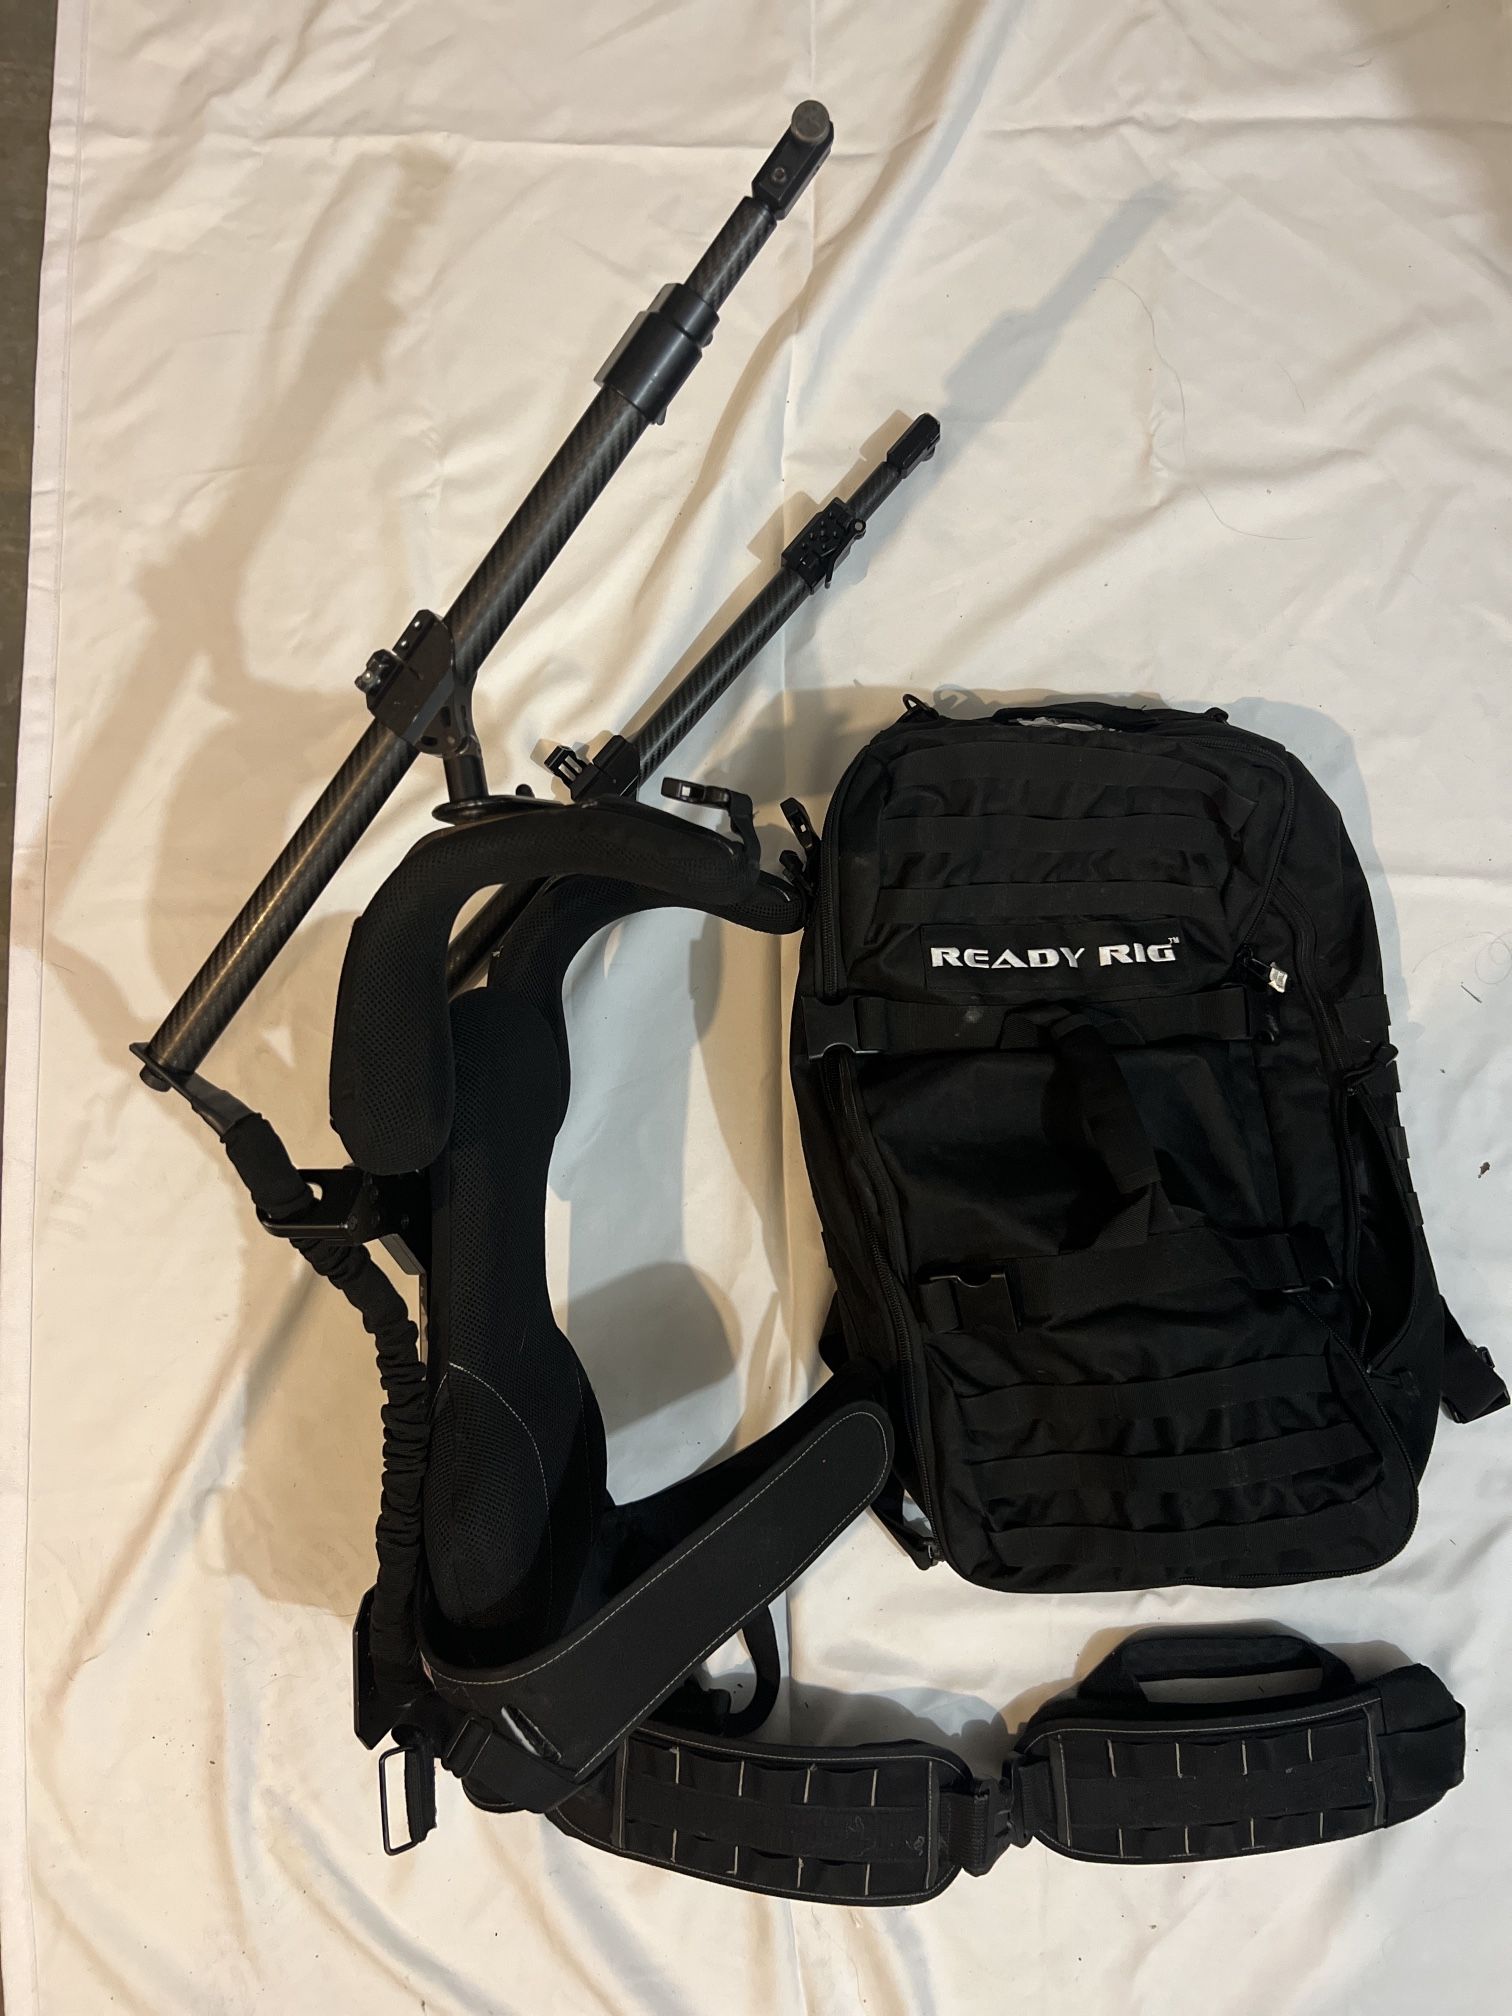 Ready Rig GS Camera Stabilizer Vest & Pro Arms